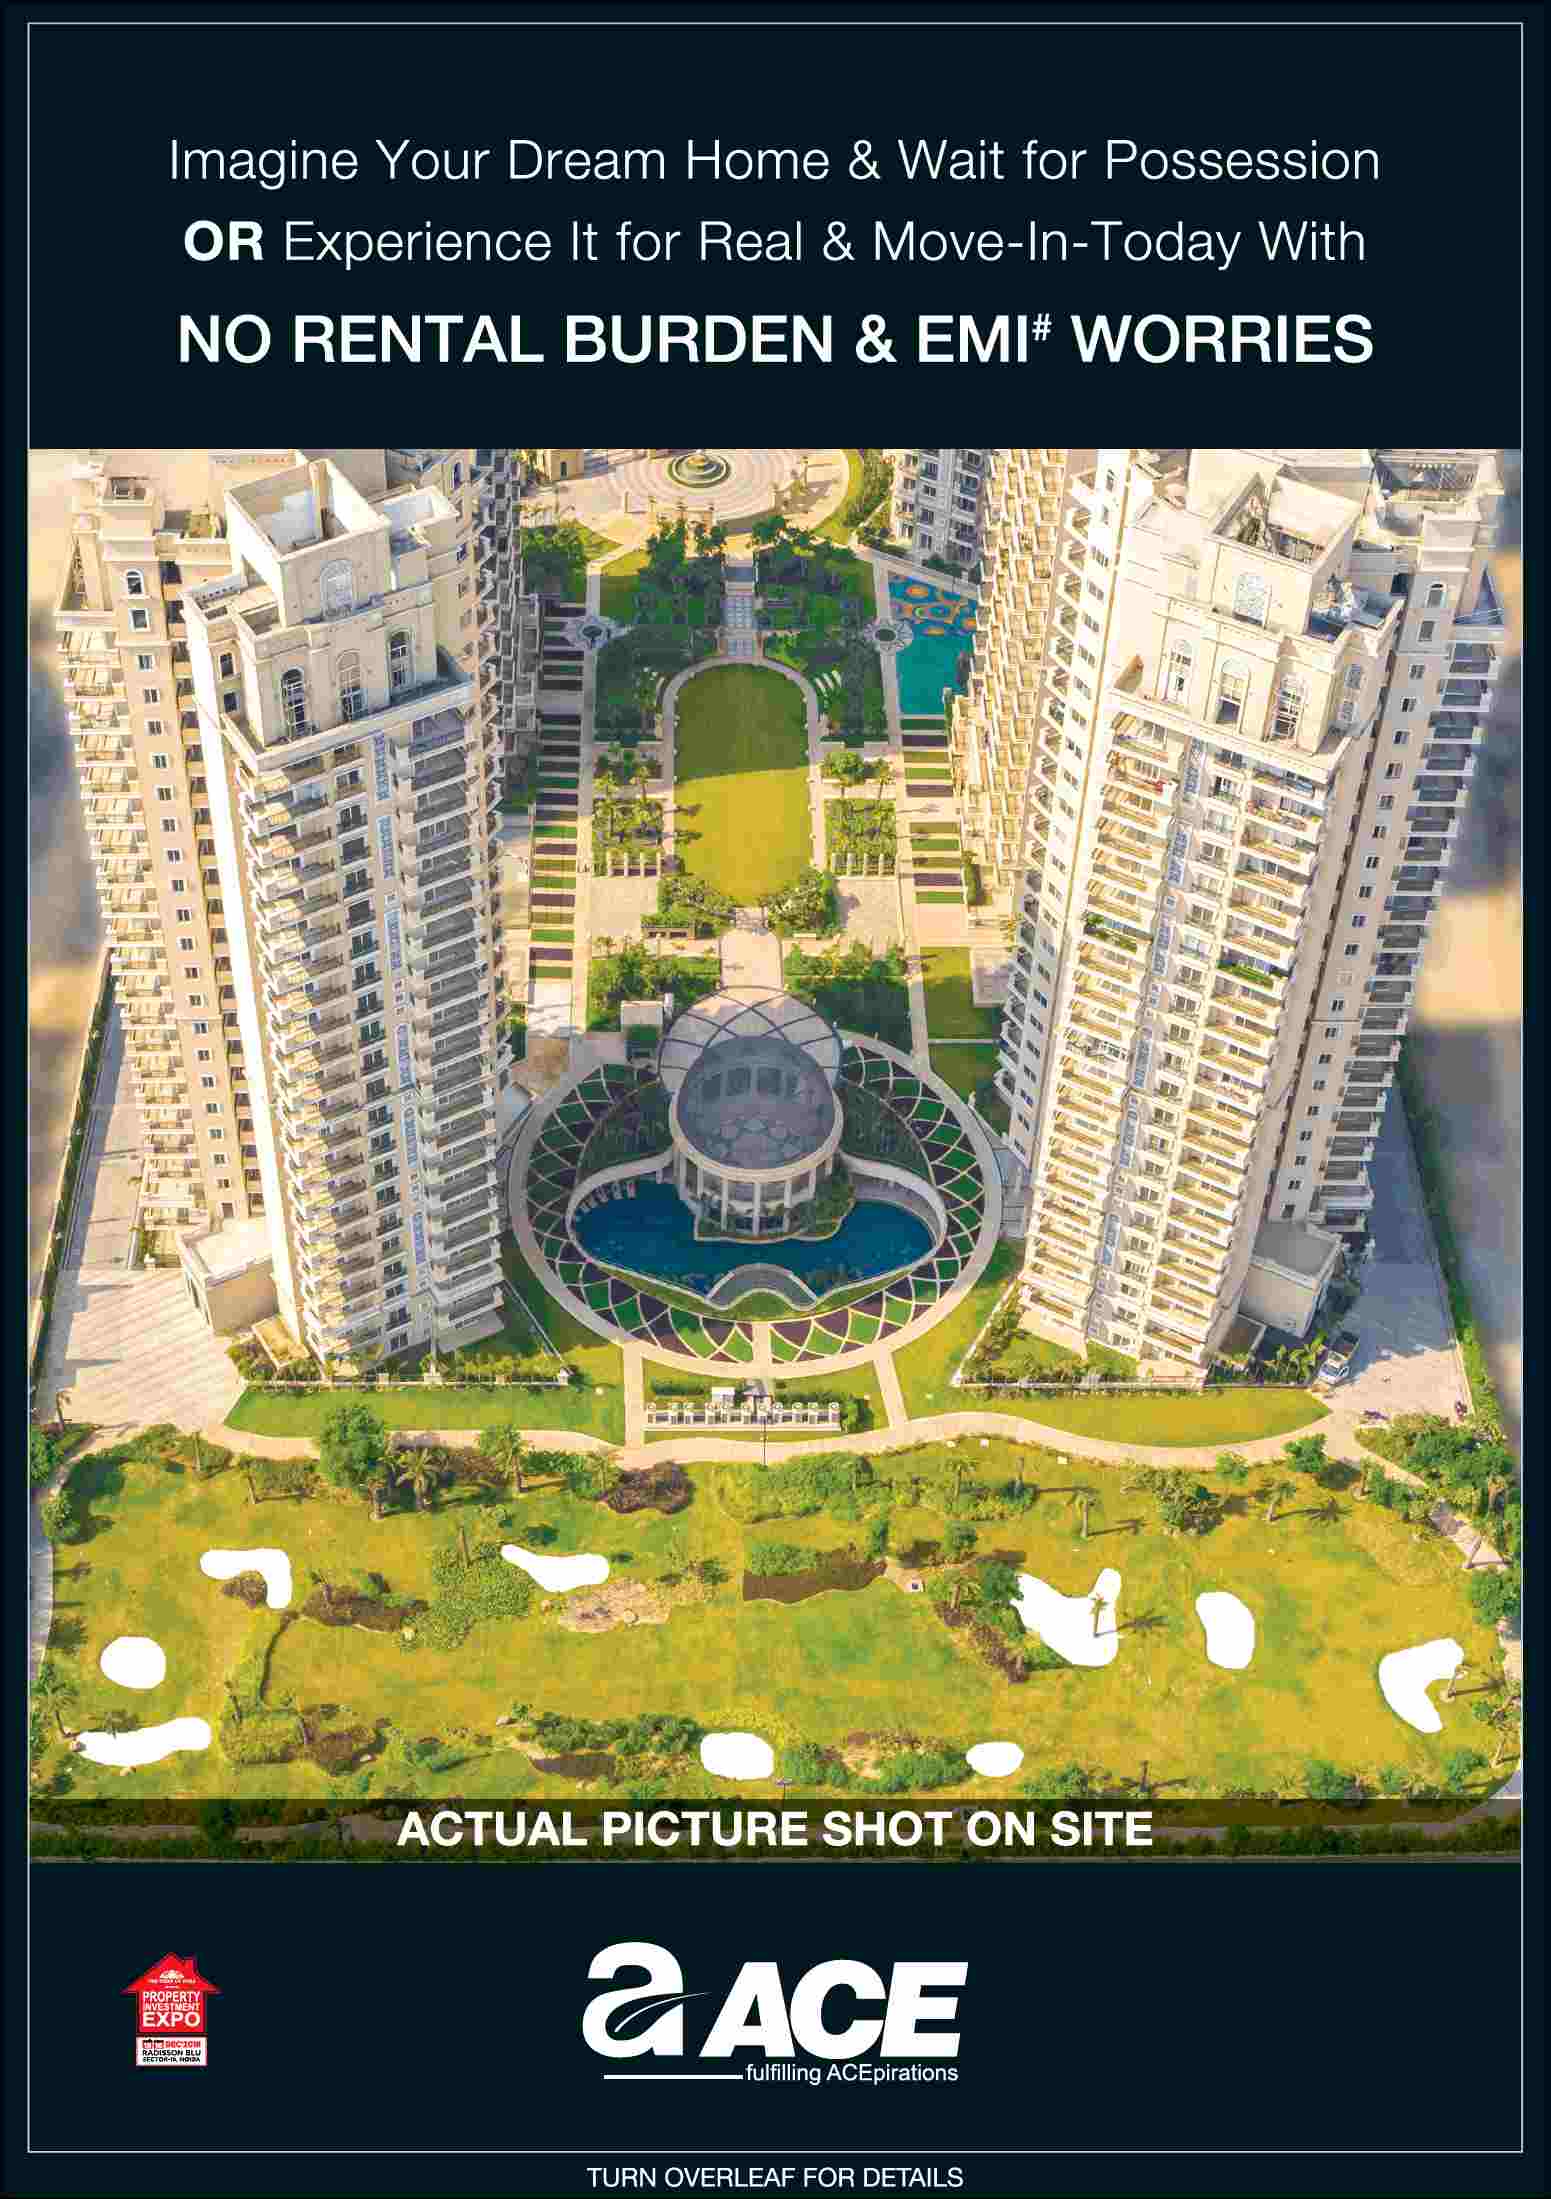 Get EMI holiday till 2020 by booking home at Ace Signature Resort Towers in Sector 150, Noida Update